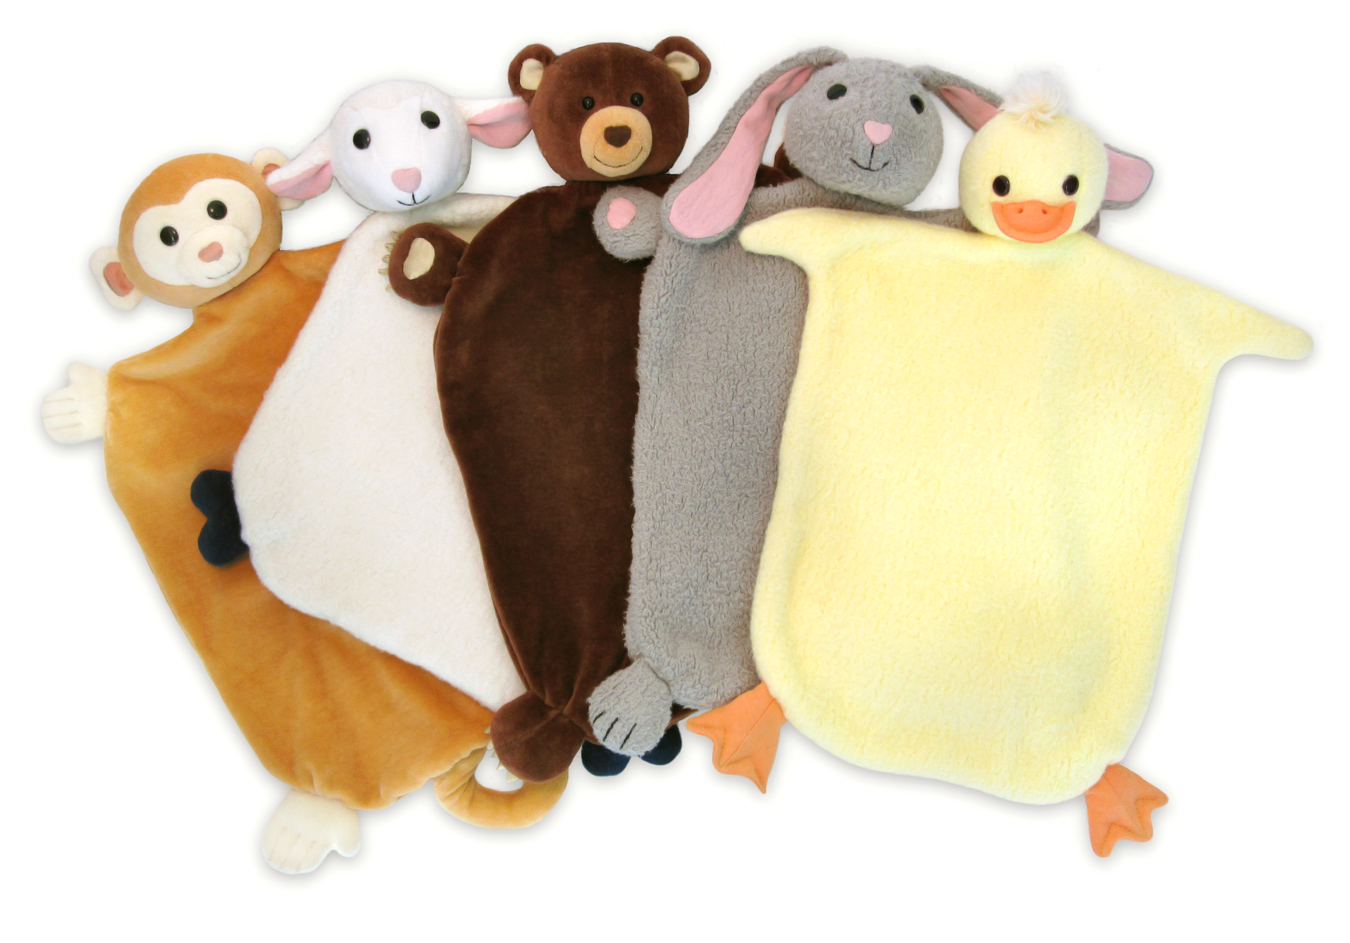 Picnic Pal Blankie - Ducky (in box)